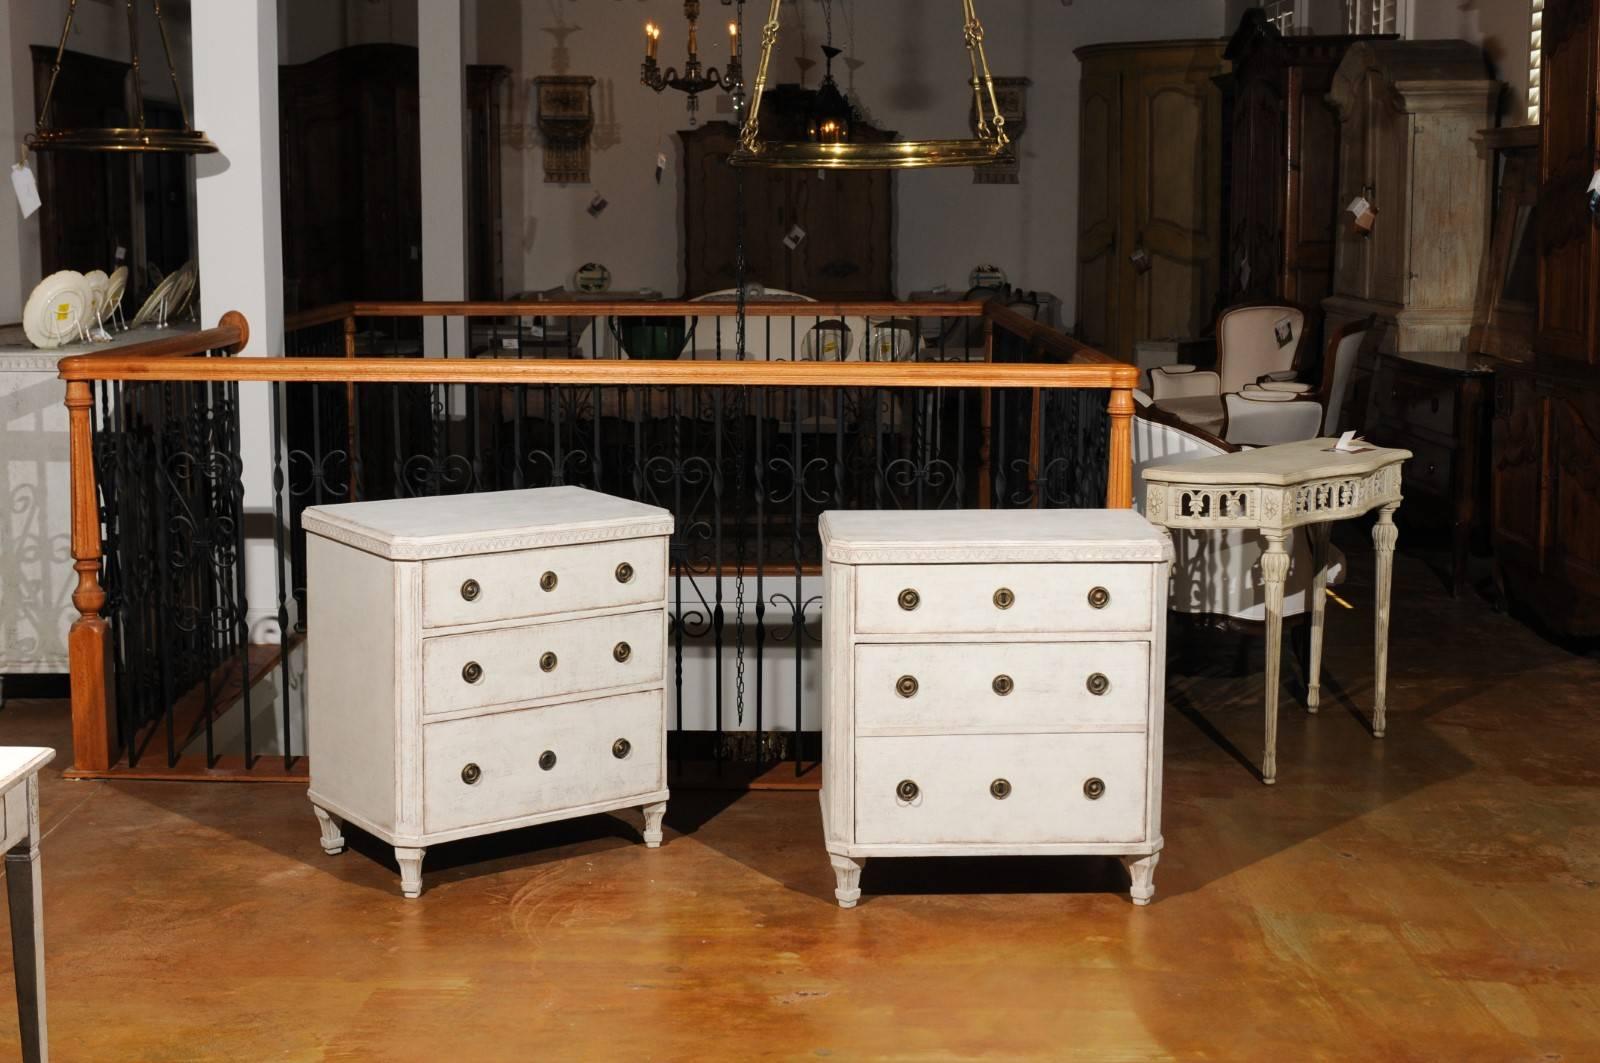 Carved Pair of Swedish Gustavian Style Painted Chests with Drawers and Door, circa 1900